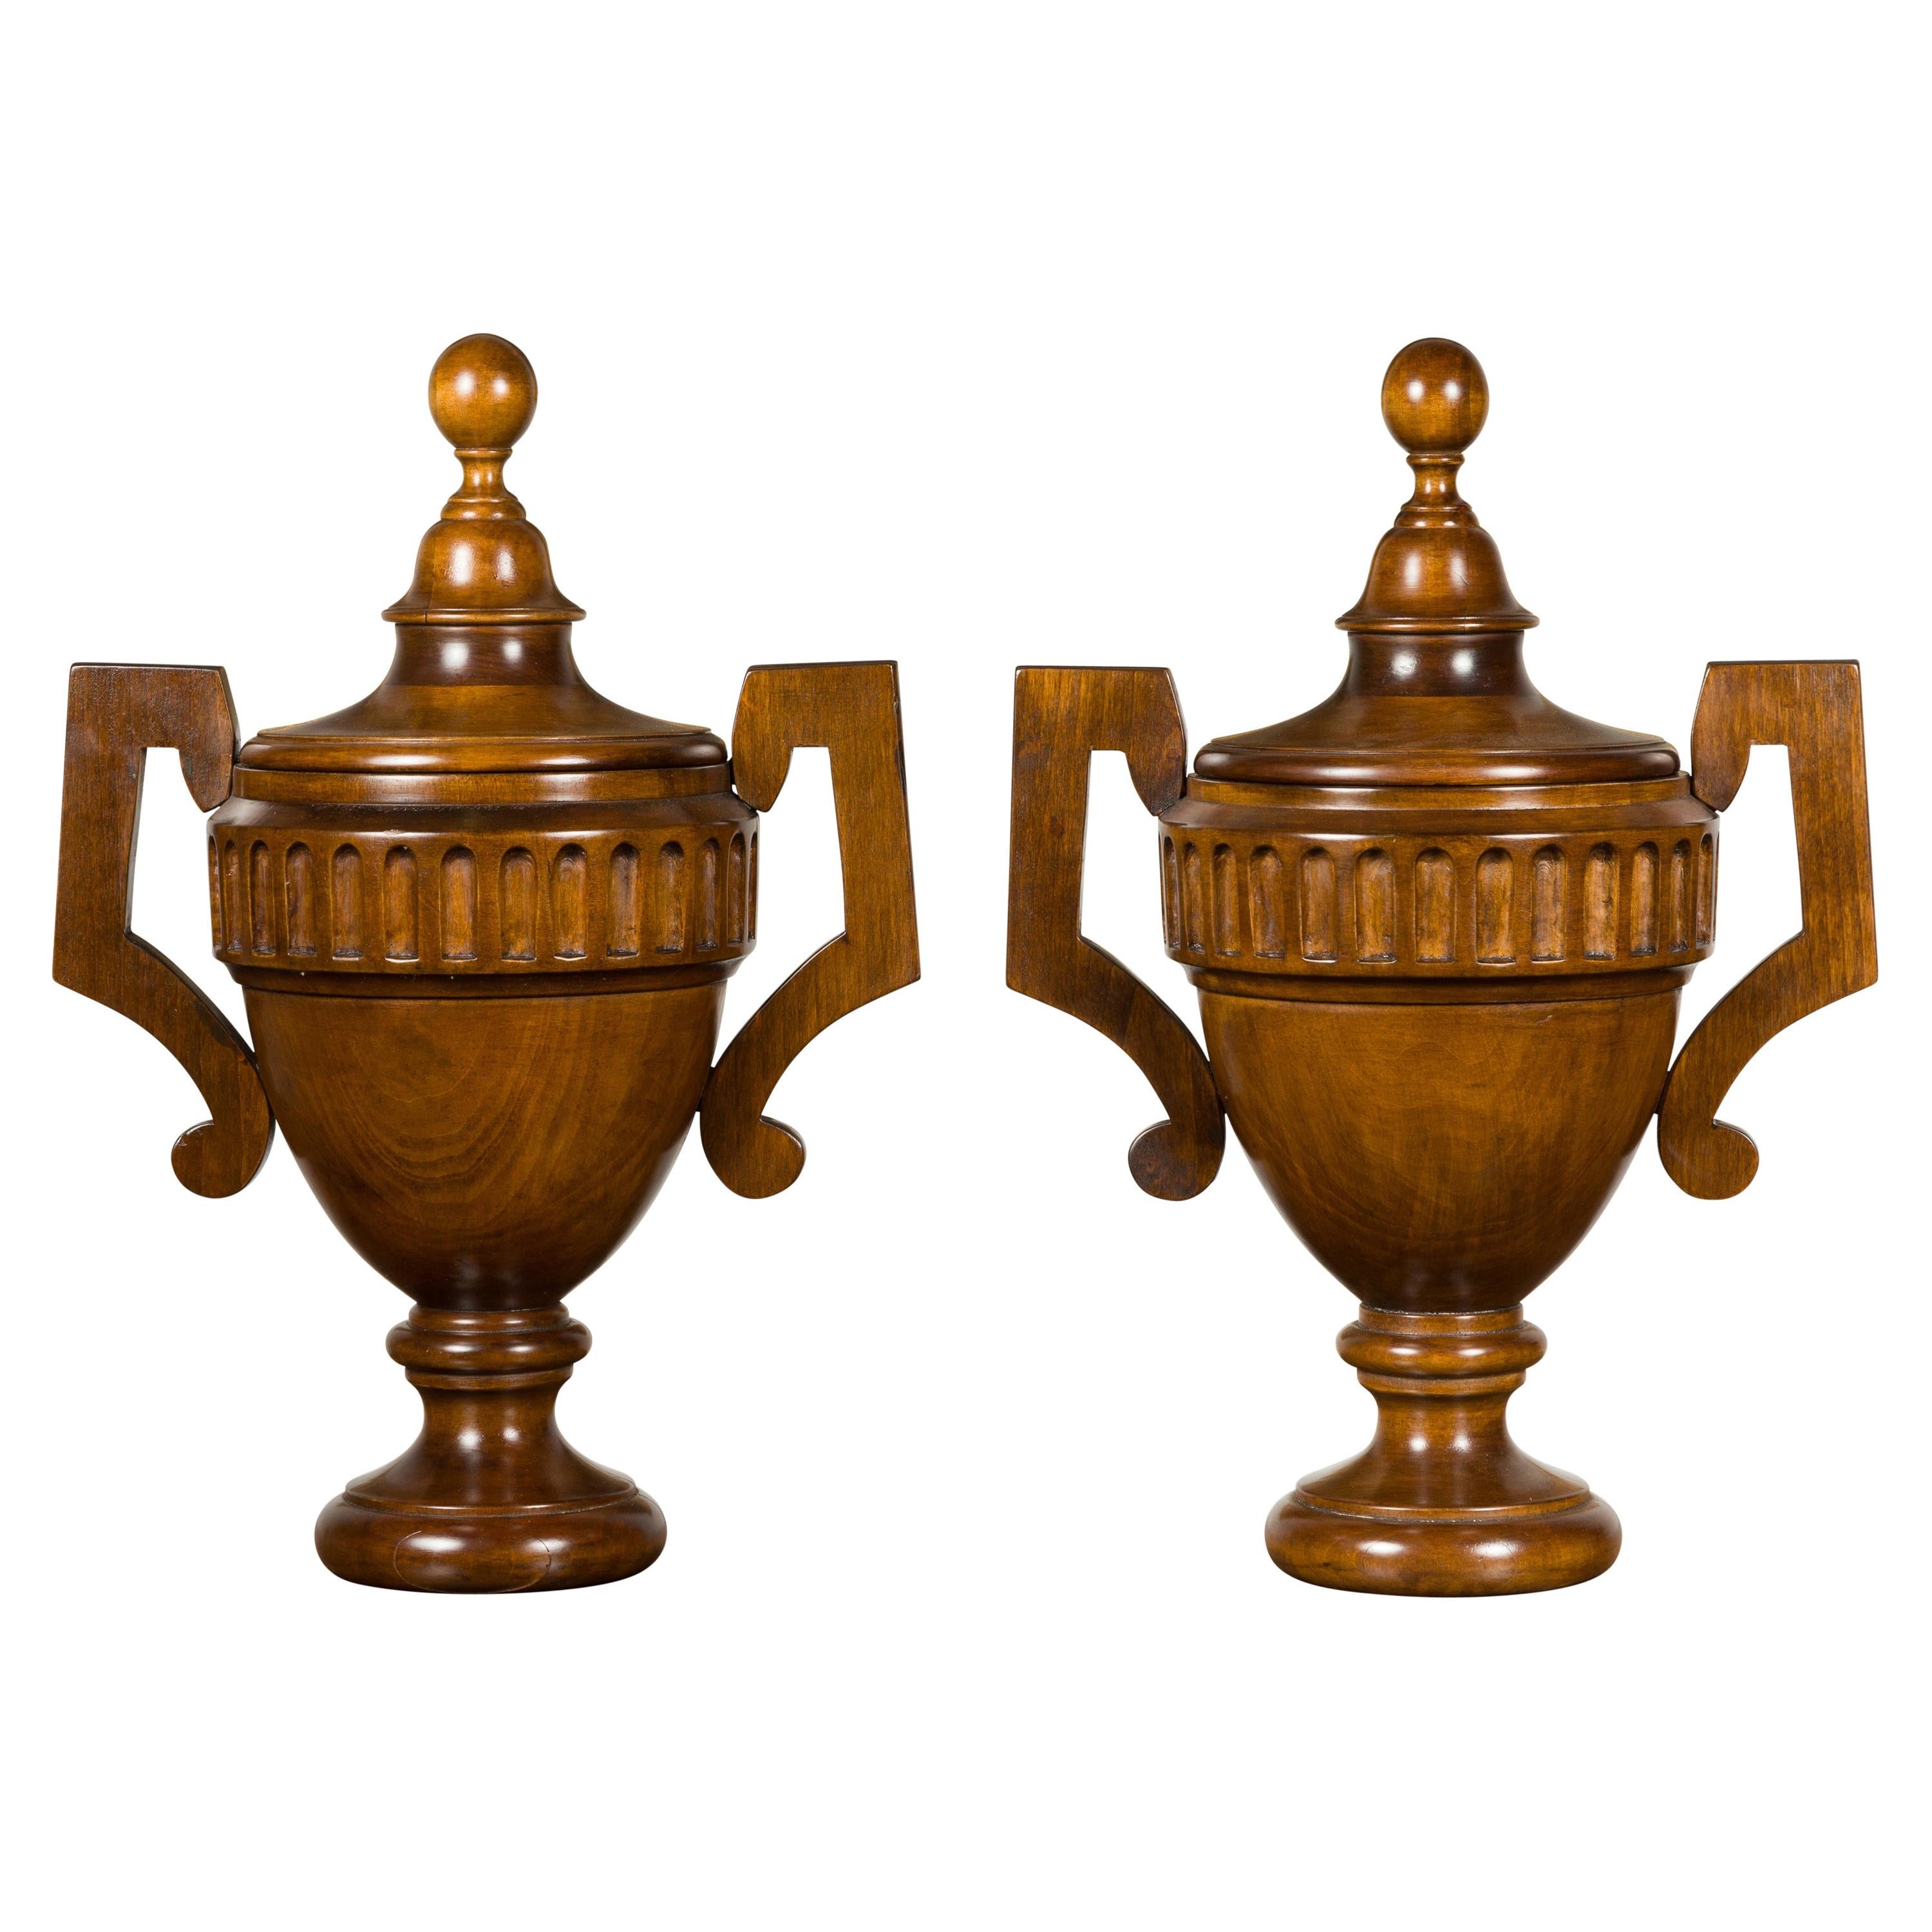 Pair of Midcentury English Carved Walnut Lidded Urns with Large Handles